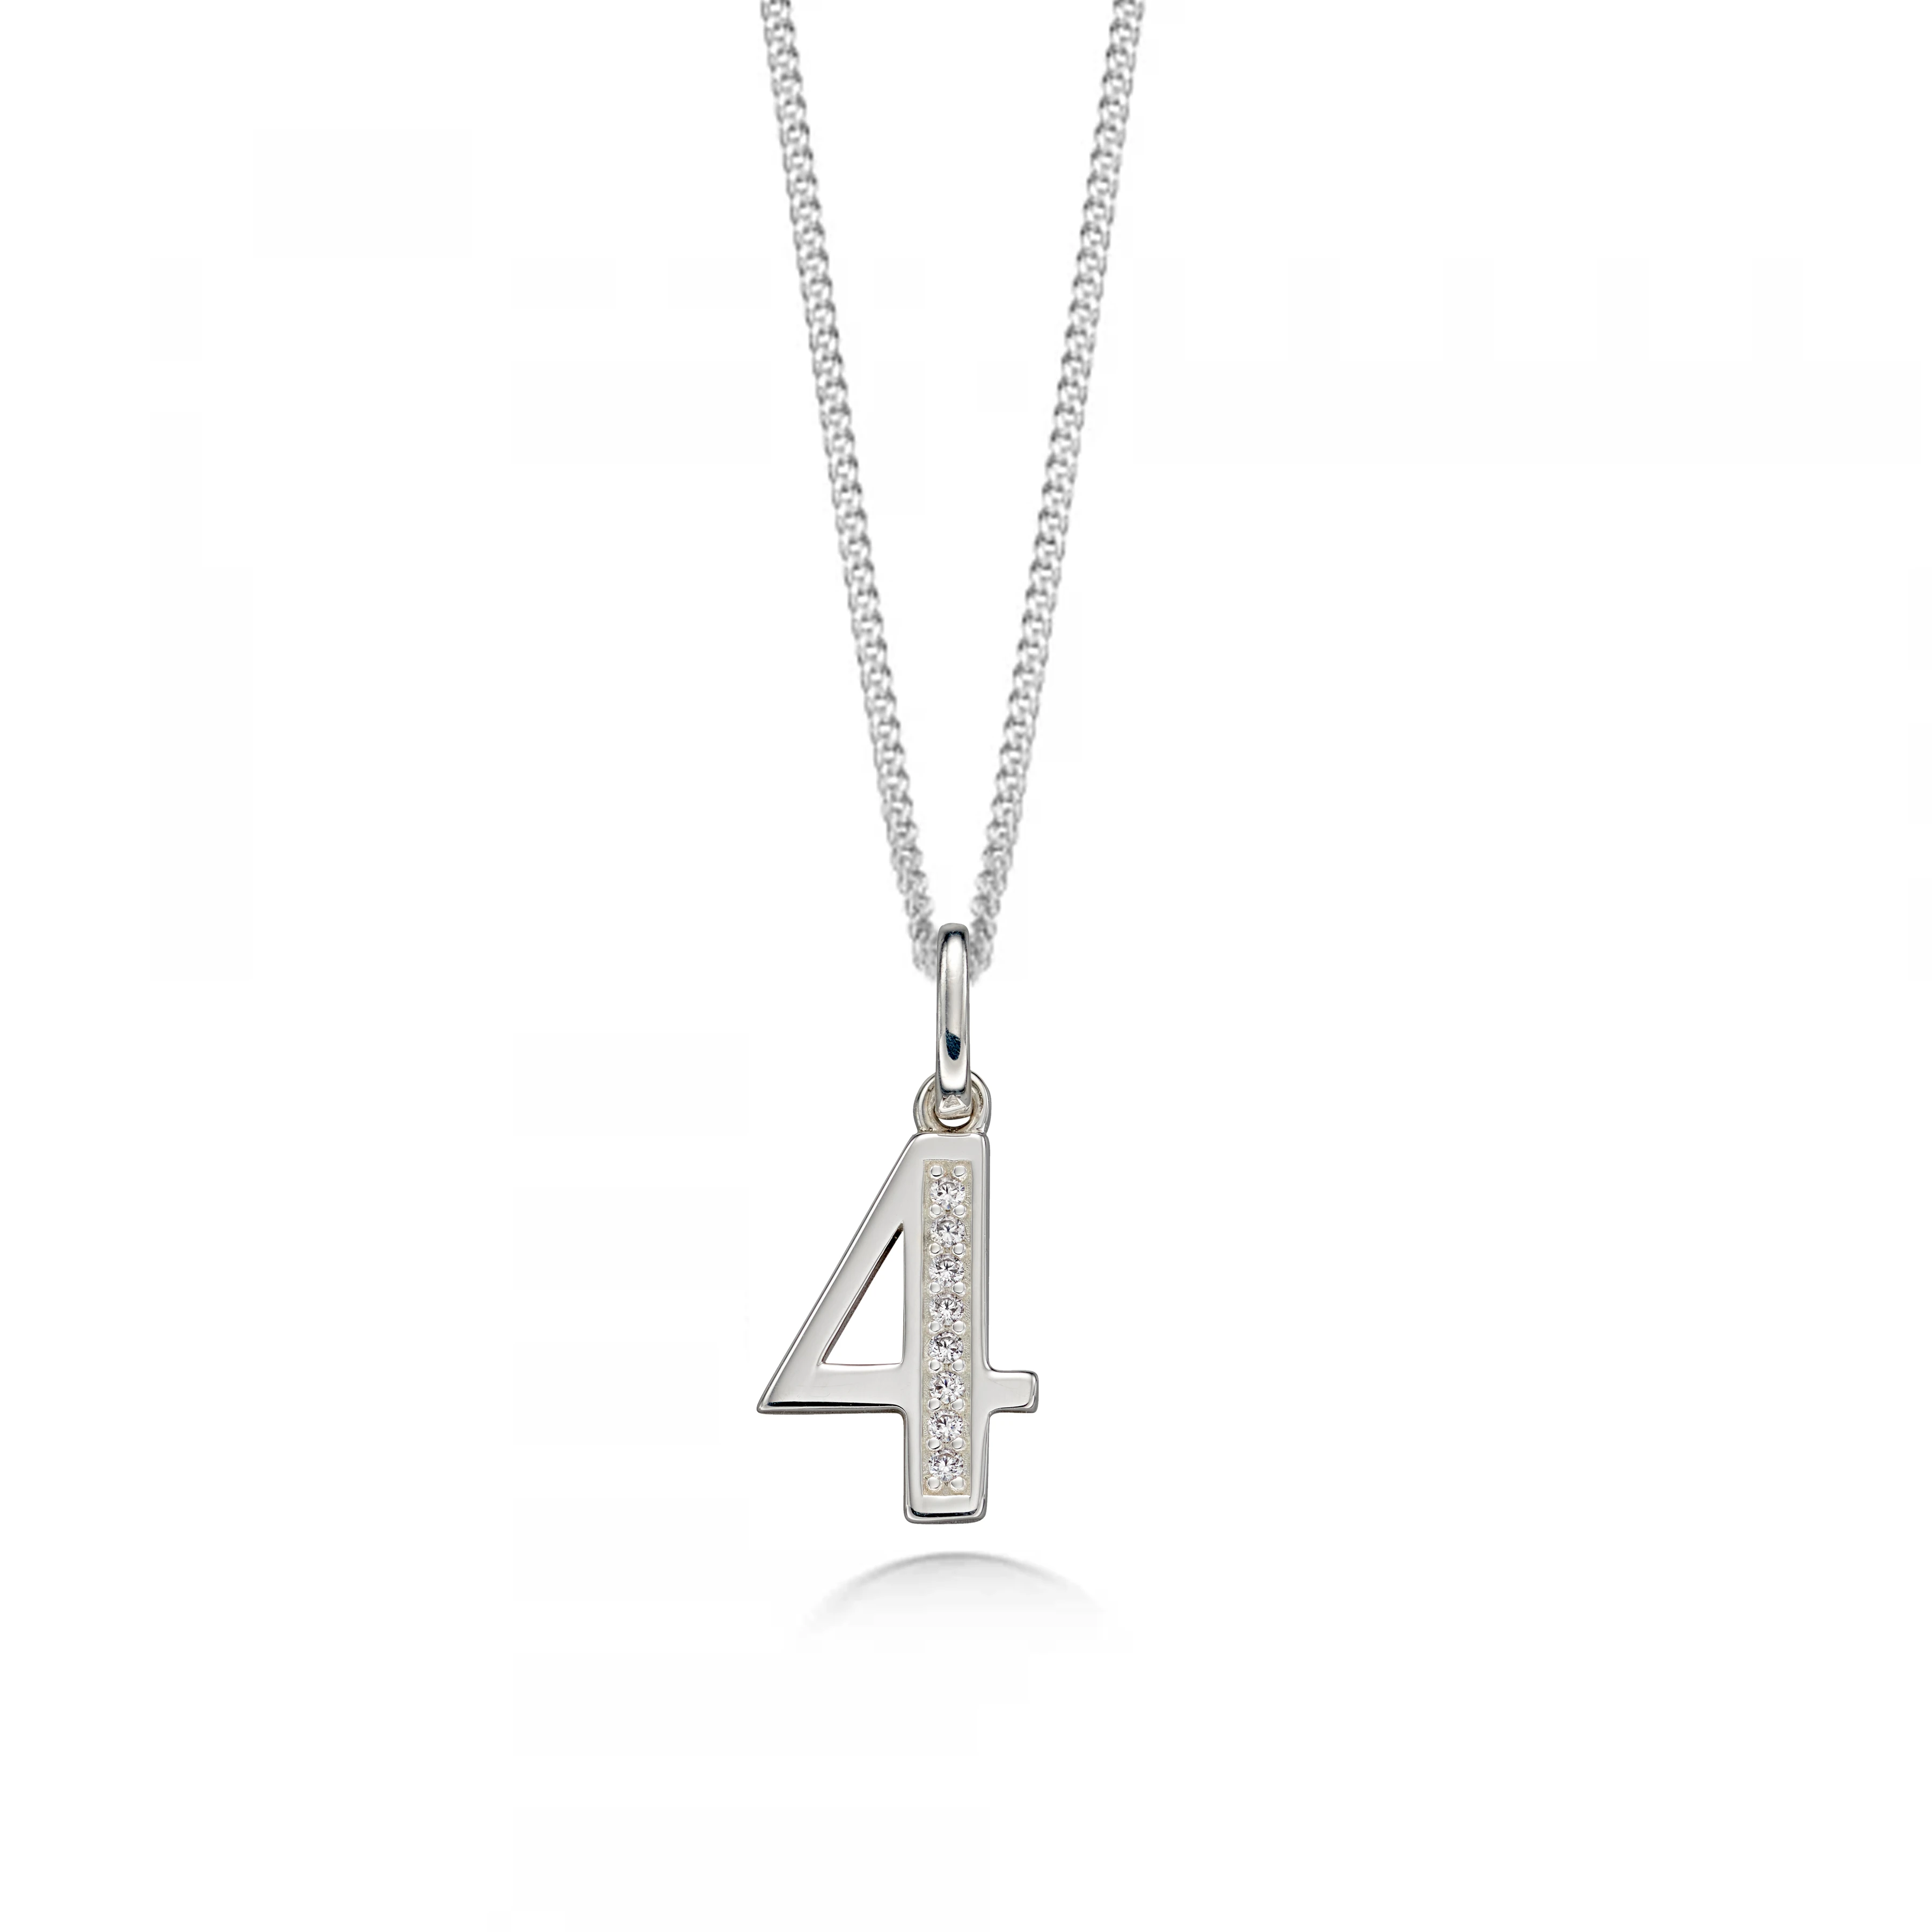 Pave Setting Number Four Diamond Neckalce and Pendant